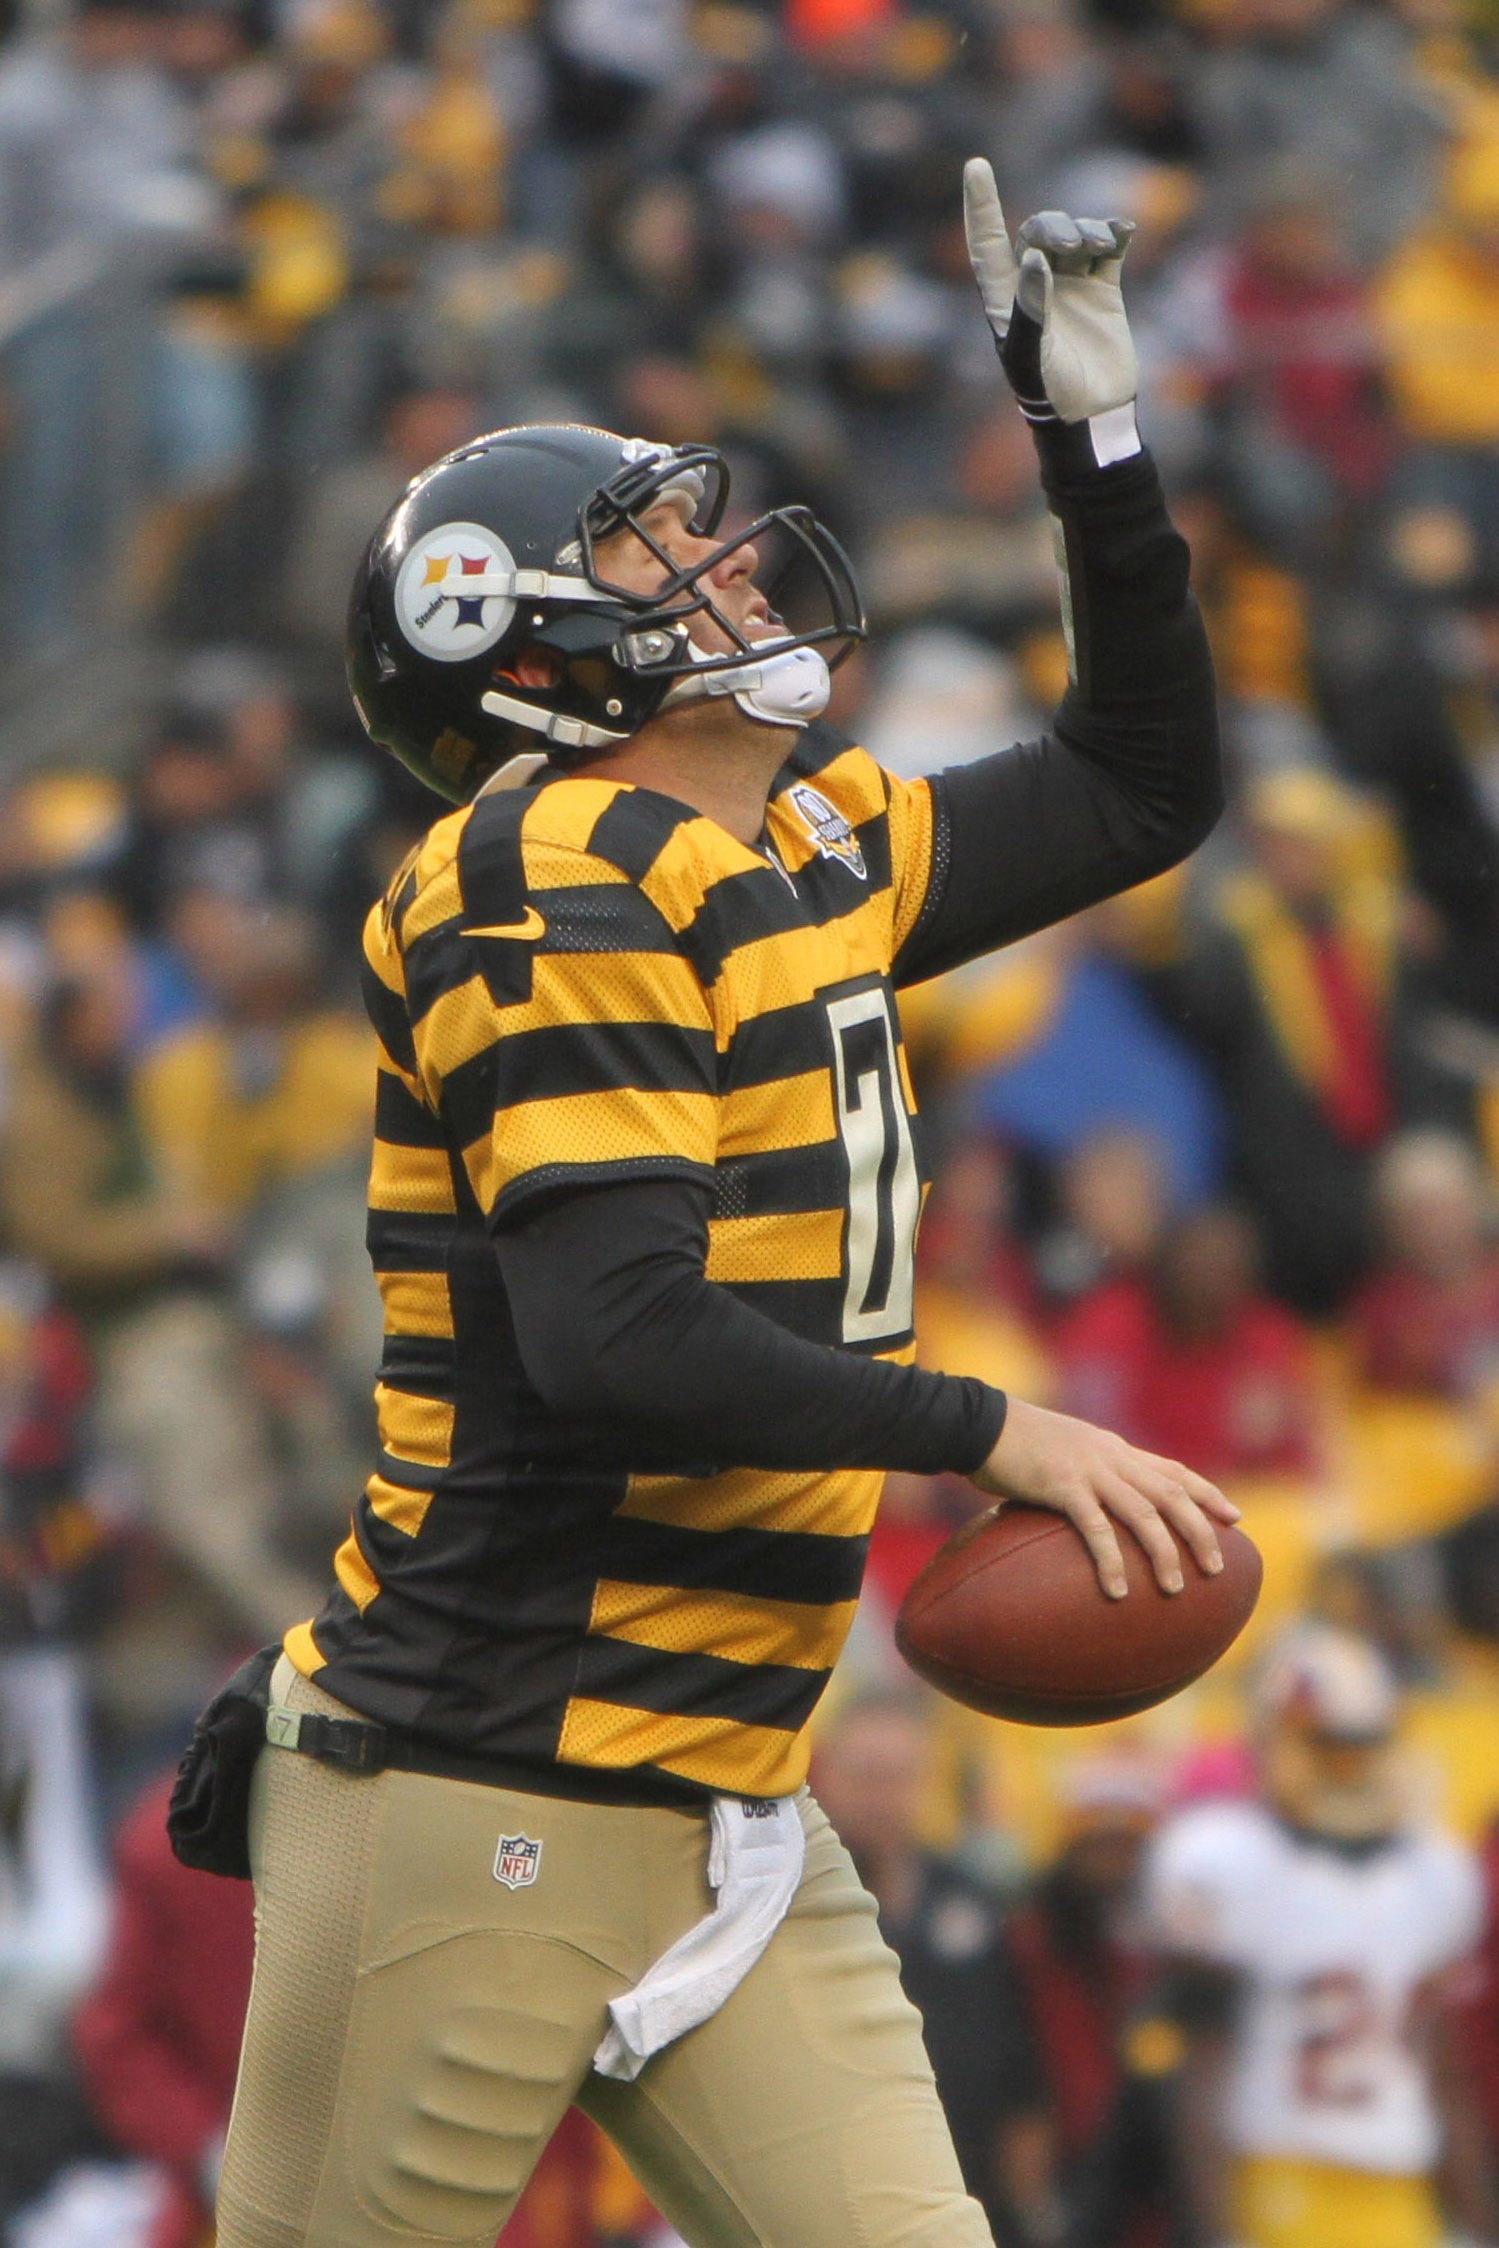 what year are the steelers throwback jerseys from